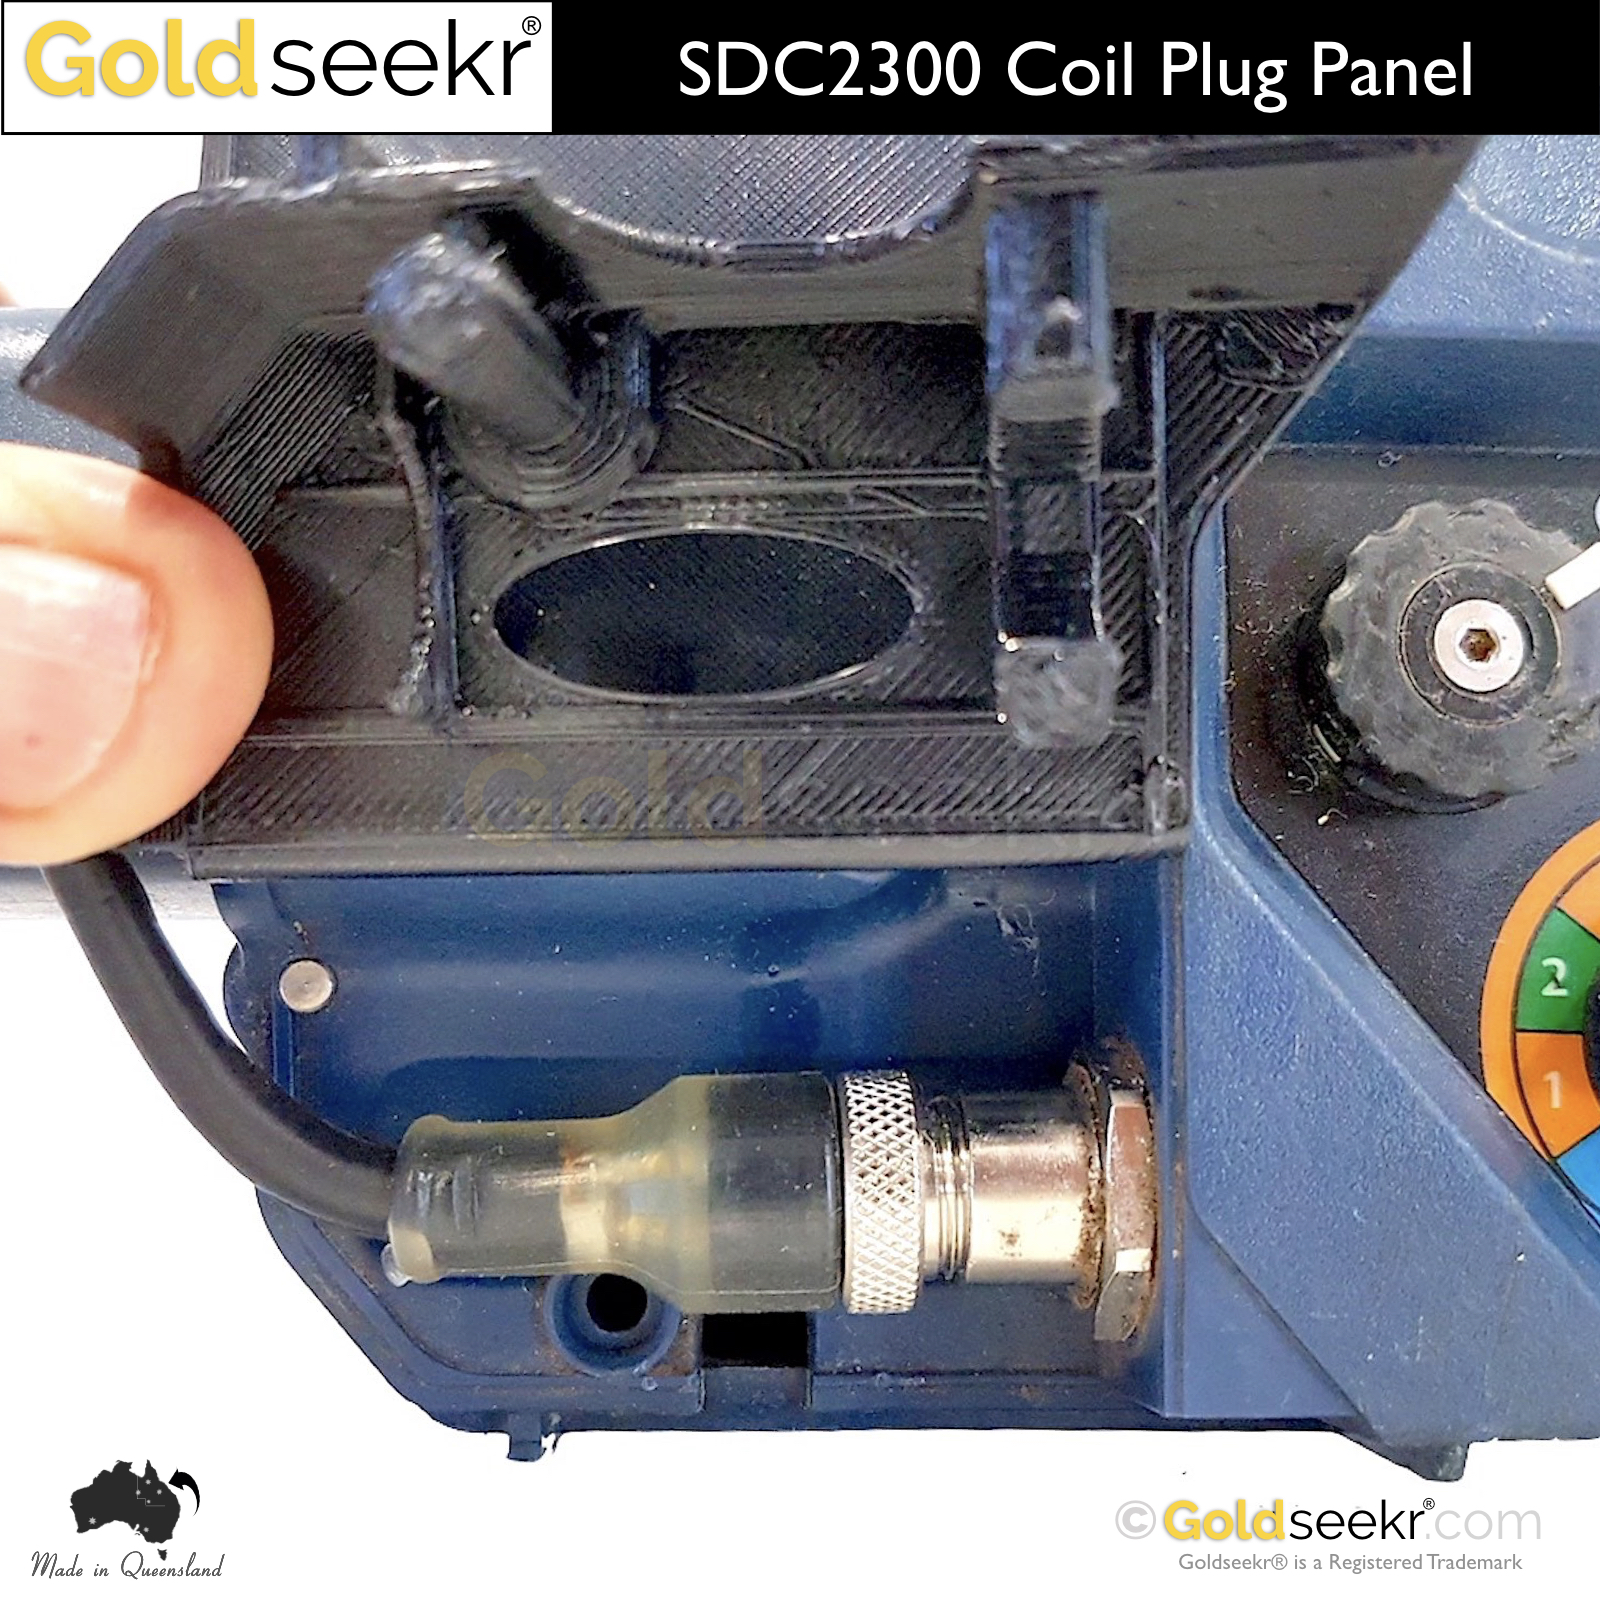 Easy-Access Coil Plug Panel – for Minelab SDC2300 Gold Extreme upgrade